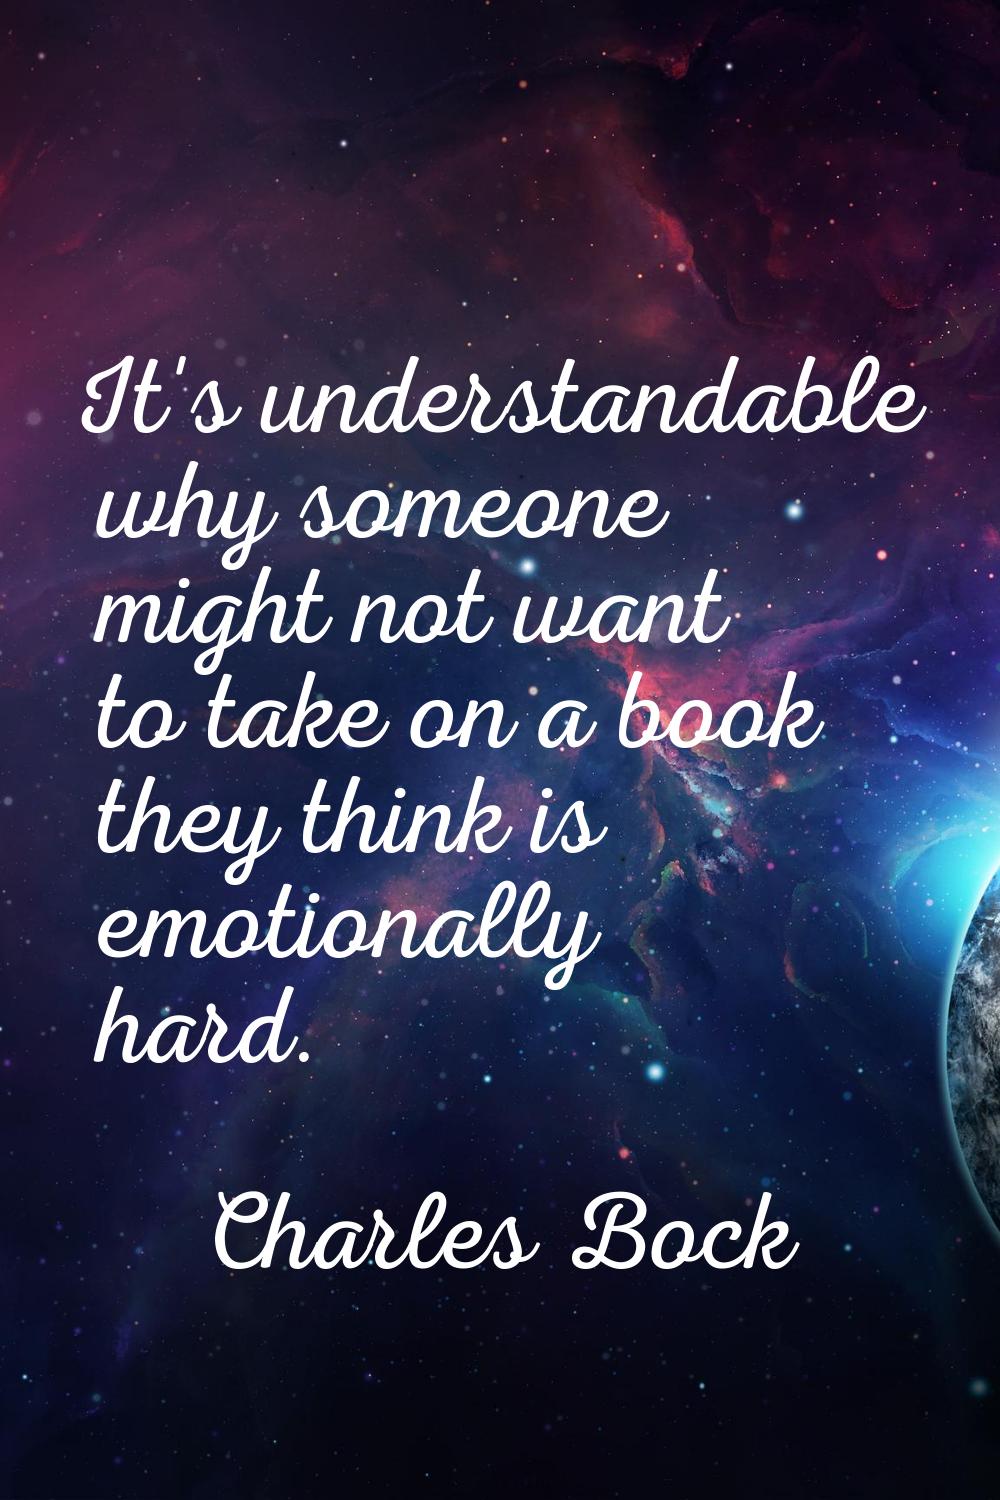 It's understandable why someone might not want to take on a book they think is emotionally hard.